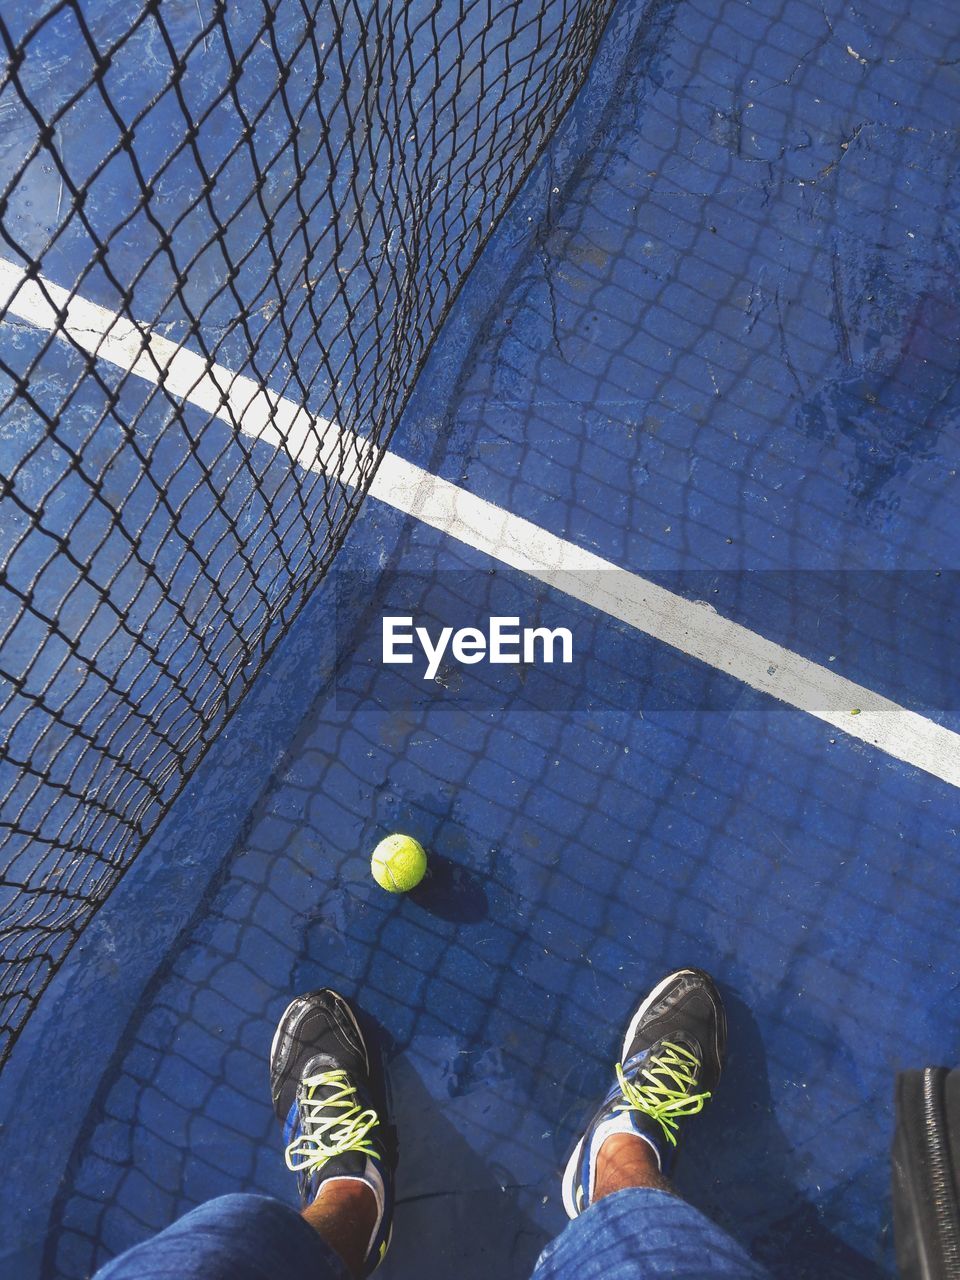 Low section of man standing by net and ball on blue tennis court